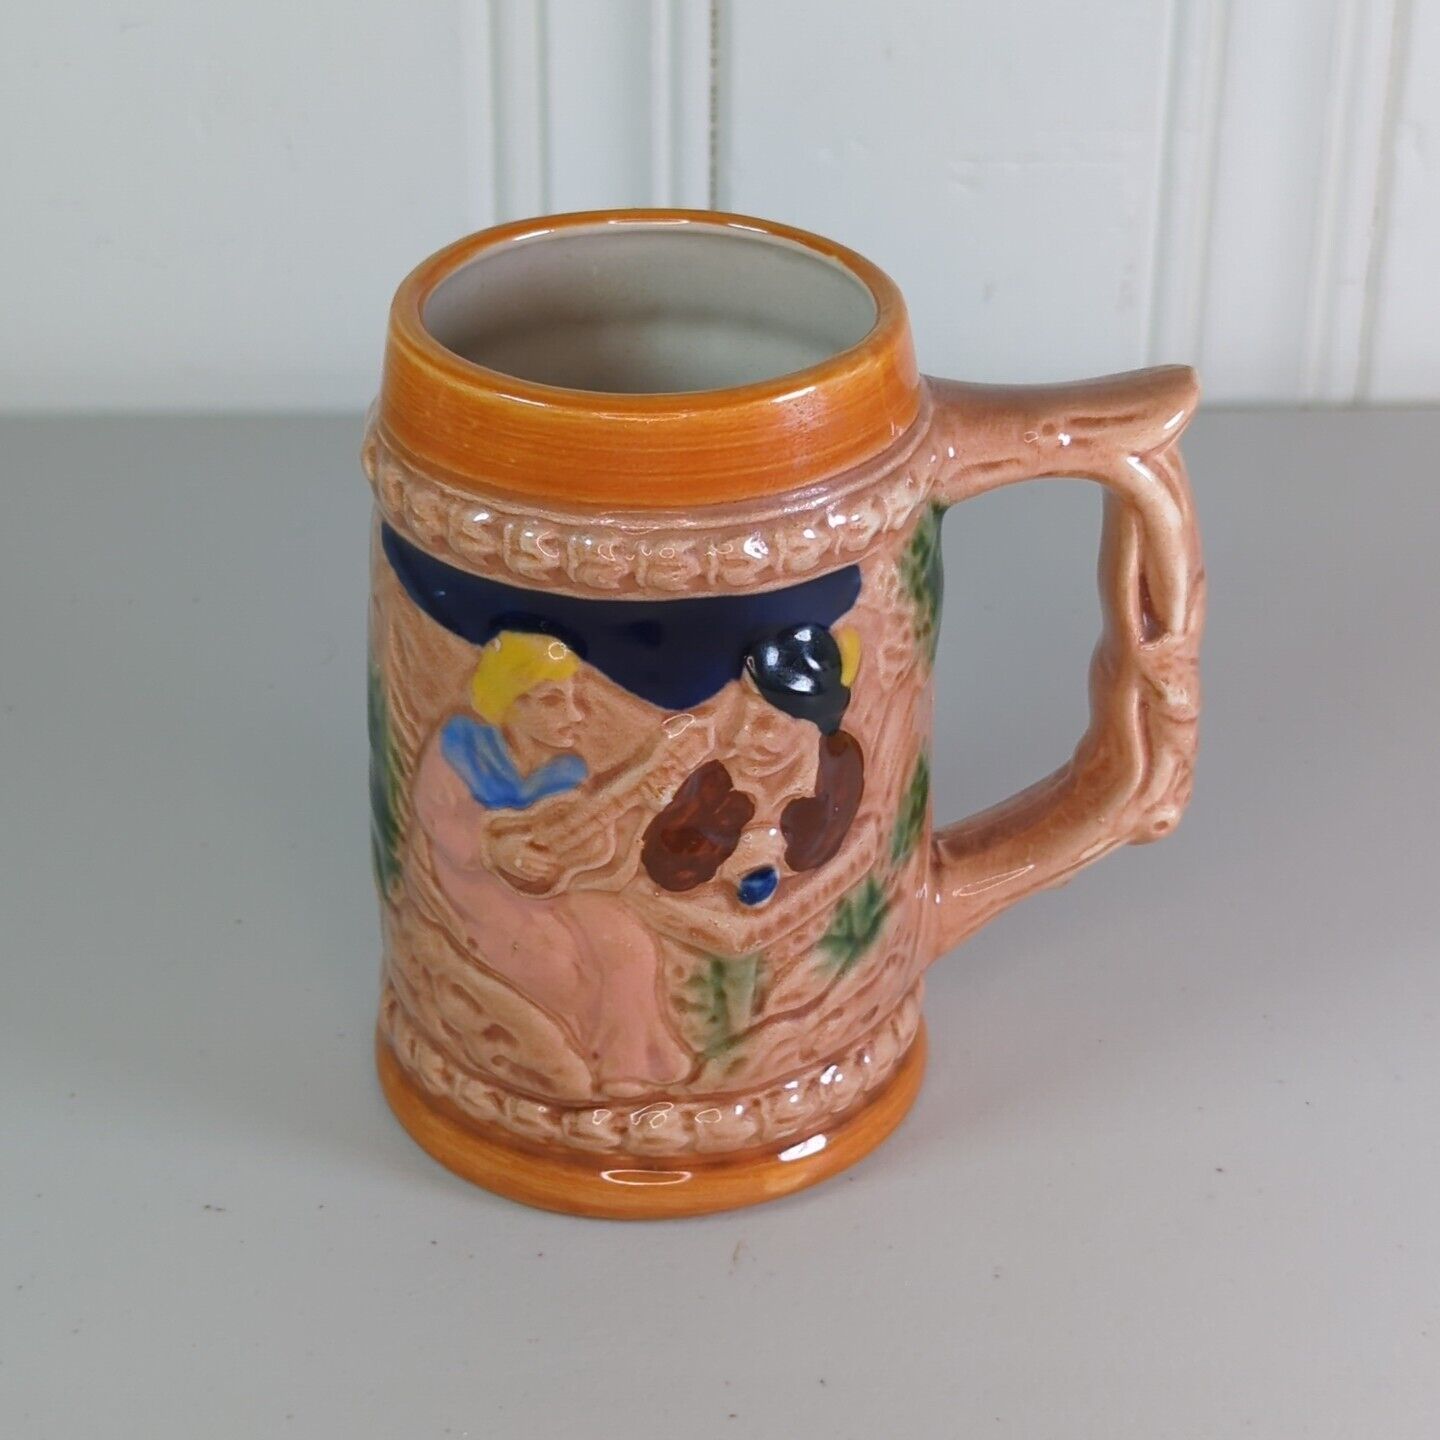 Vintage Ceramic Beer Stein Mug - Man and Woman Playing Guitar at Table - Used -